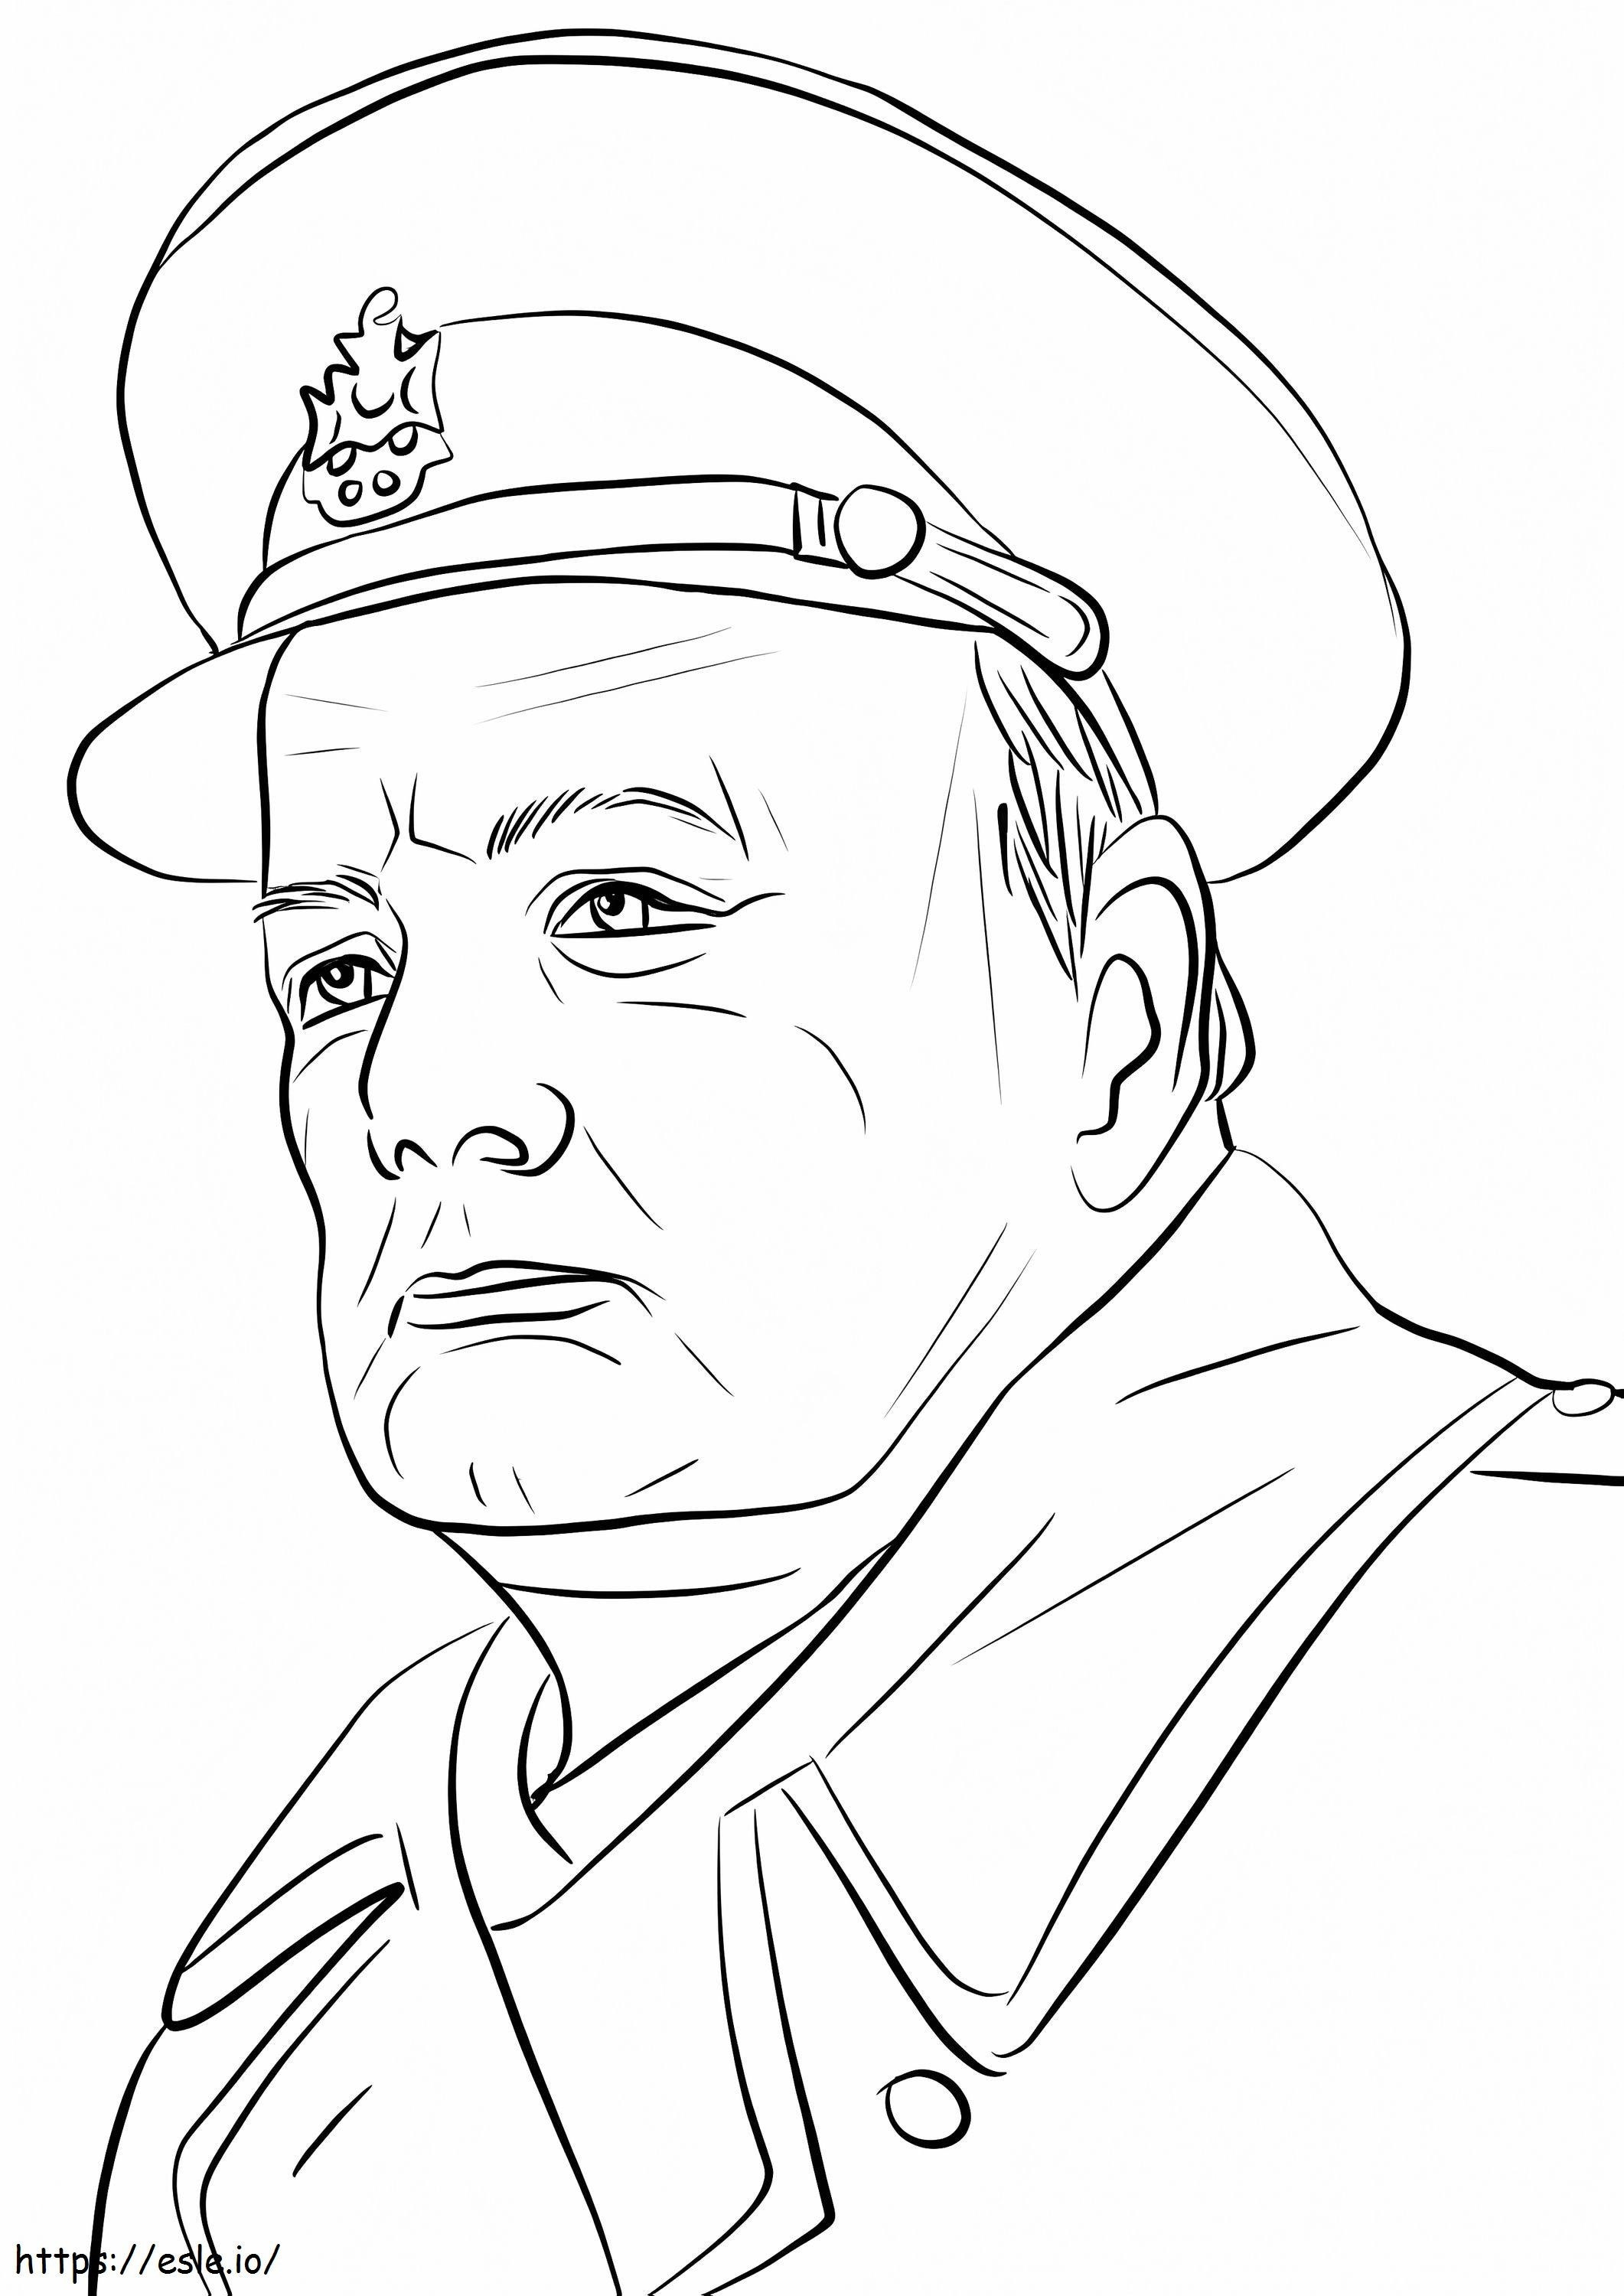 Printable Winston Churchill coloring page